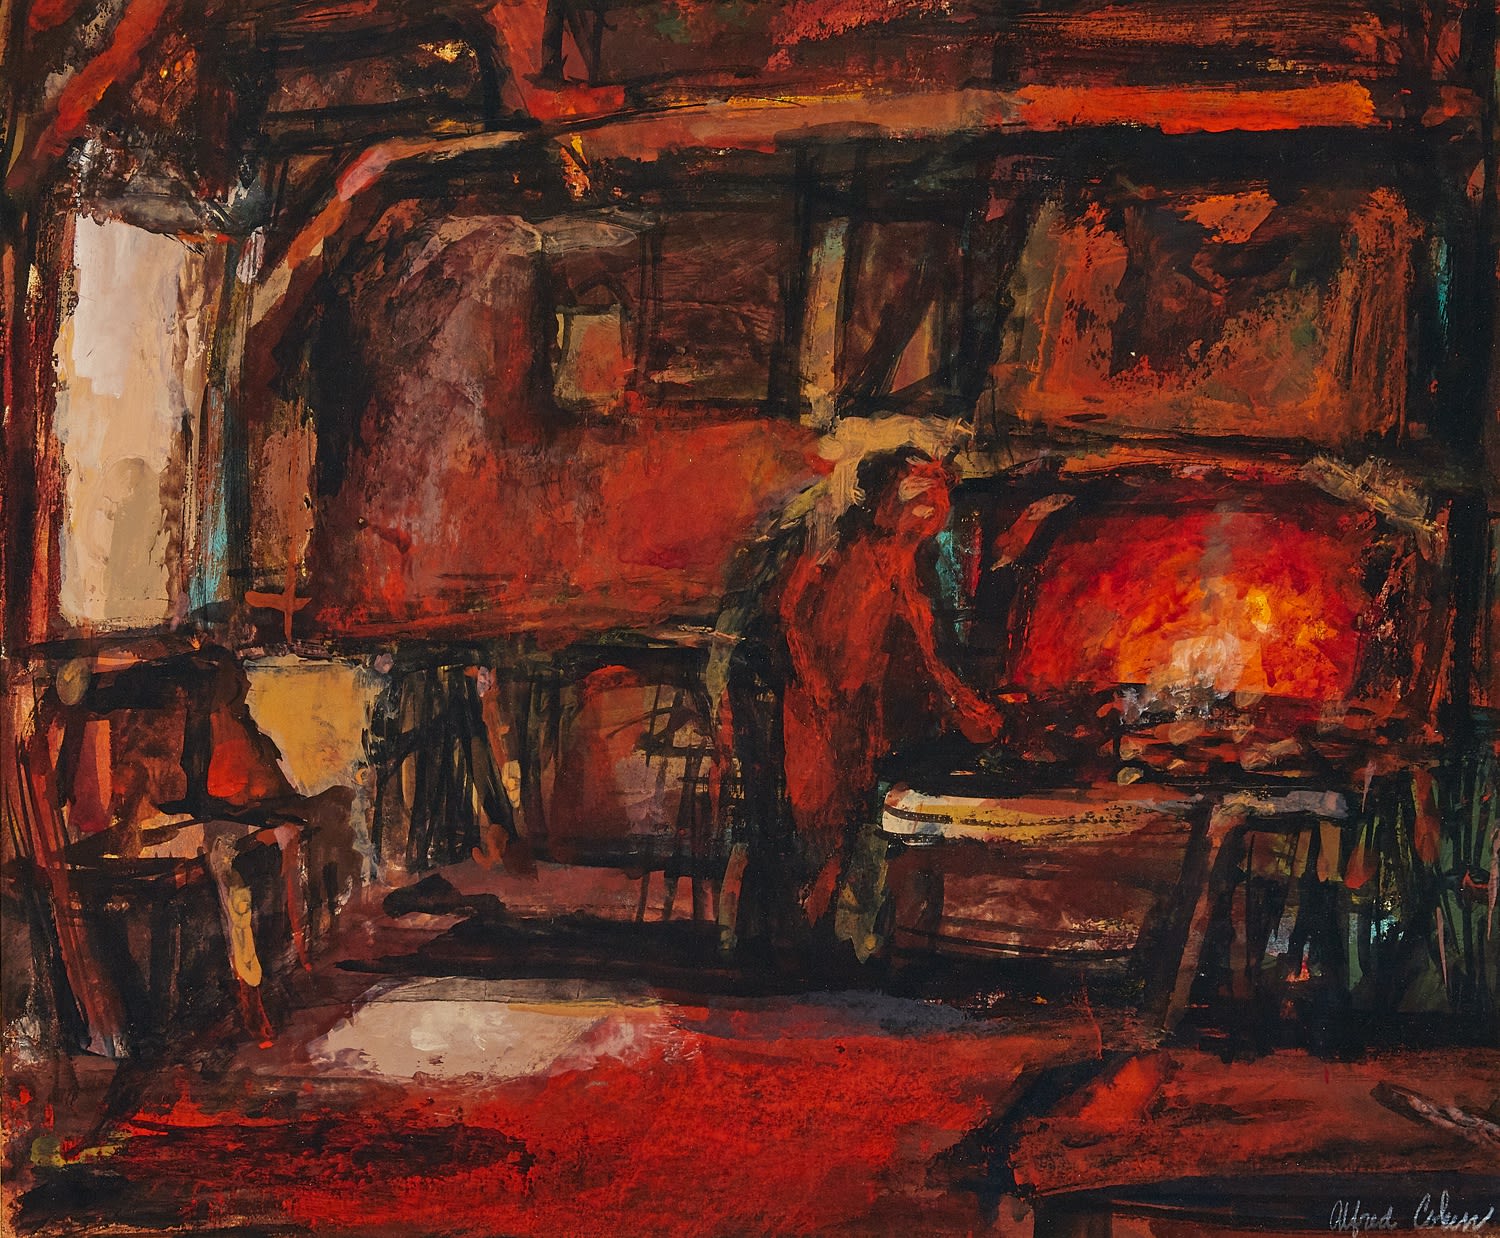 Alfred Cohen (1920-2001) The Forge c. 1962 Casein 24.8 x 29.9 cm © Estate of Alfred Cohen 2020